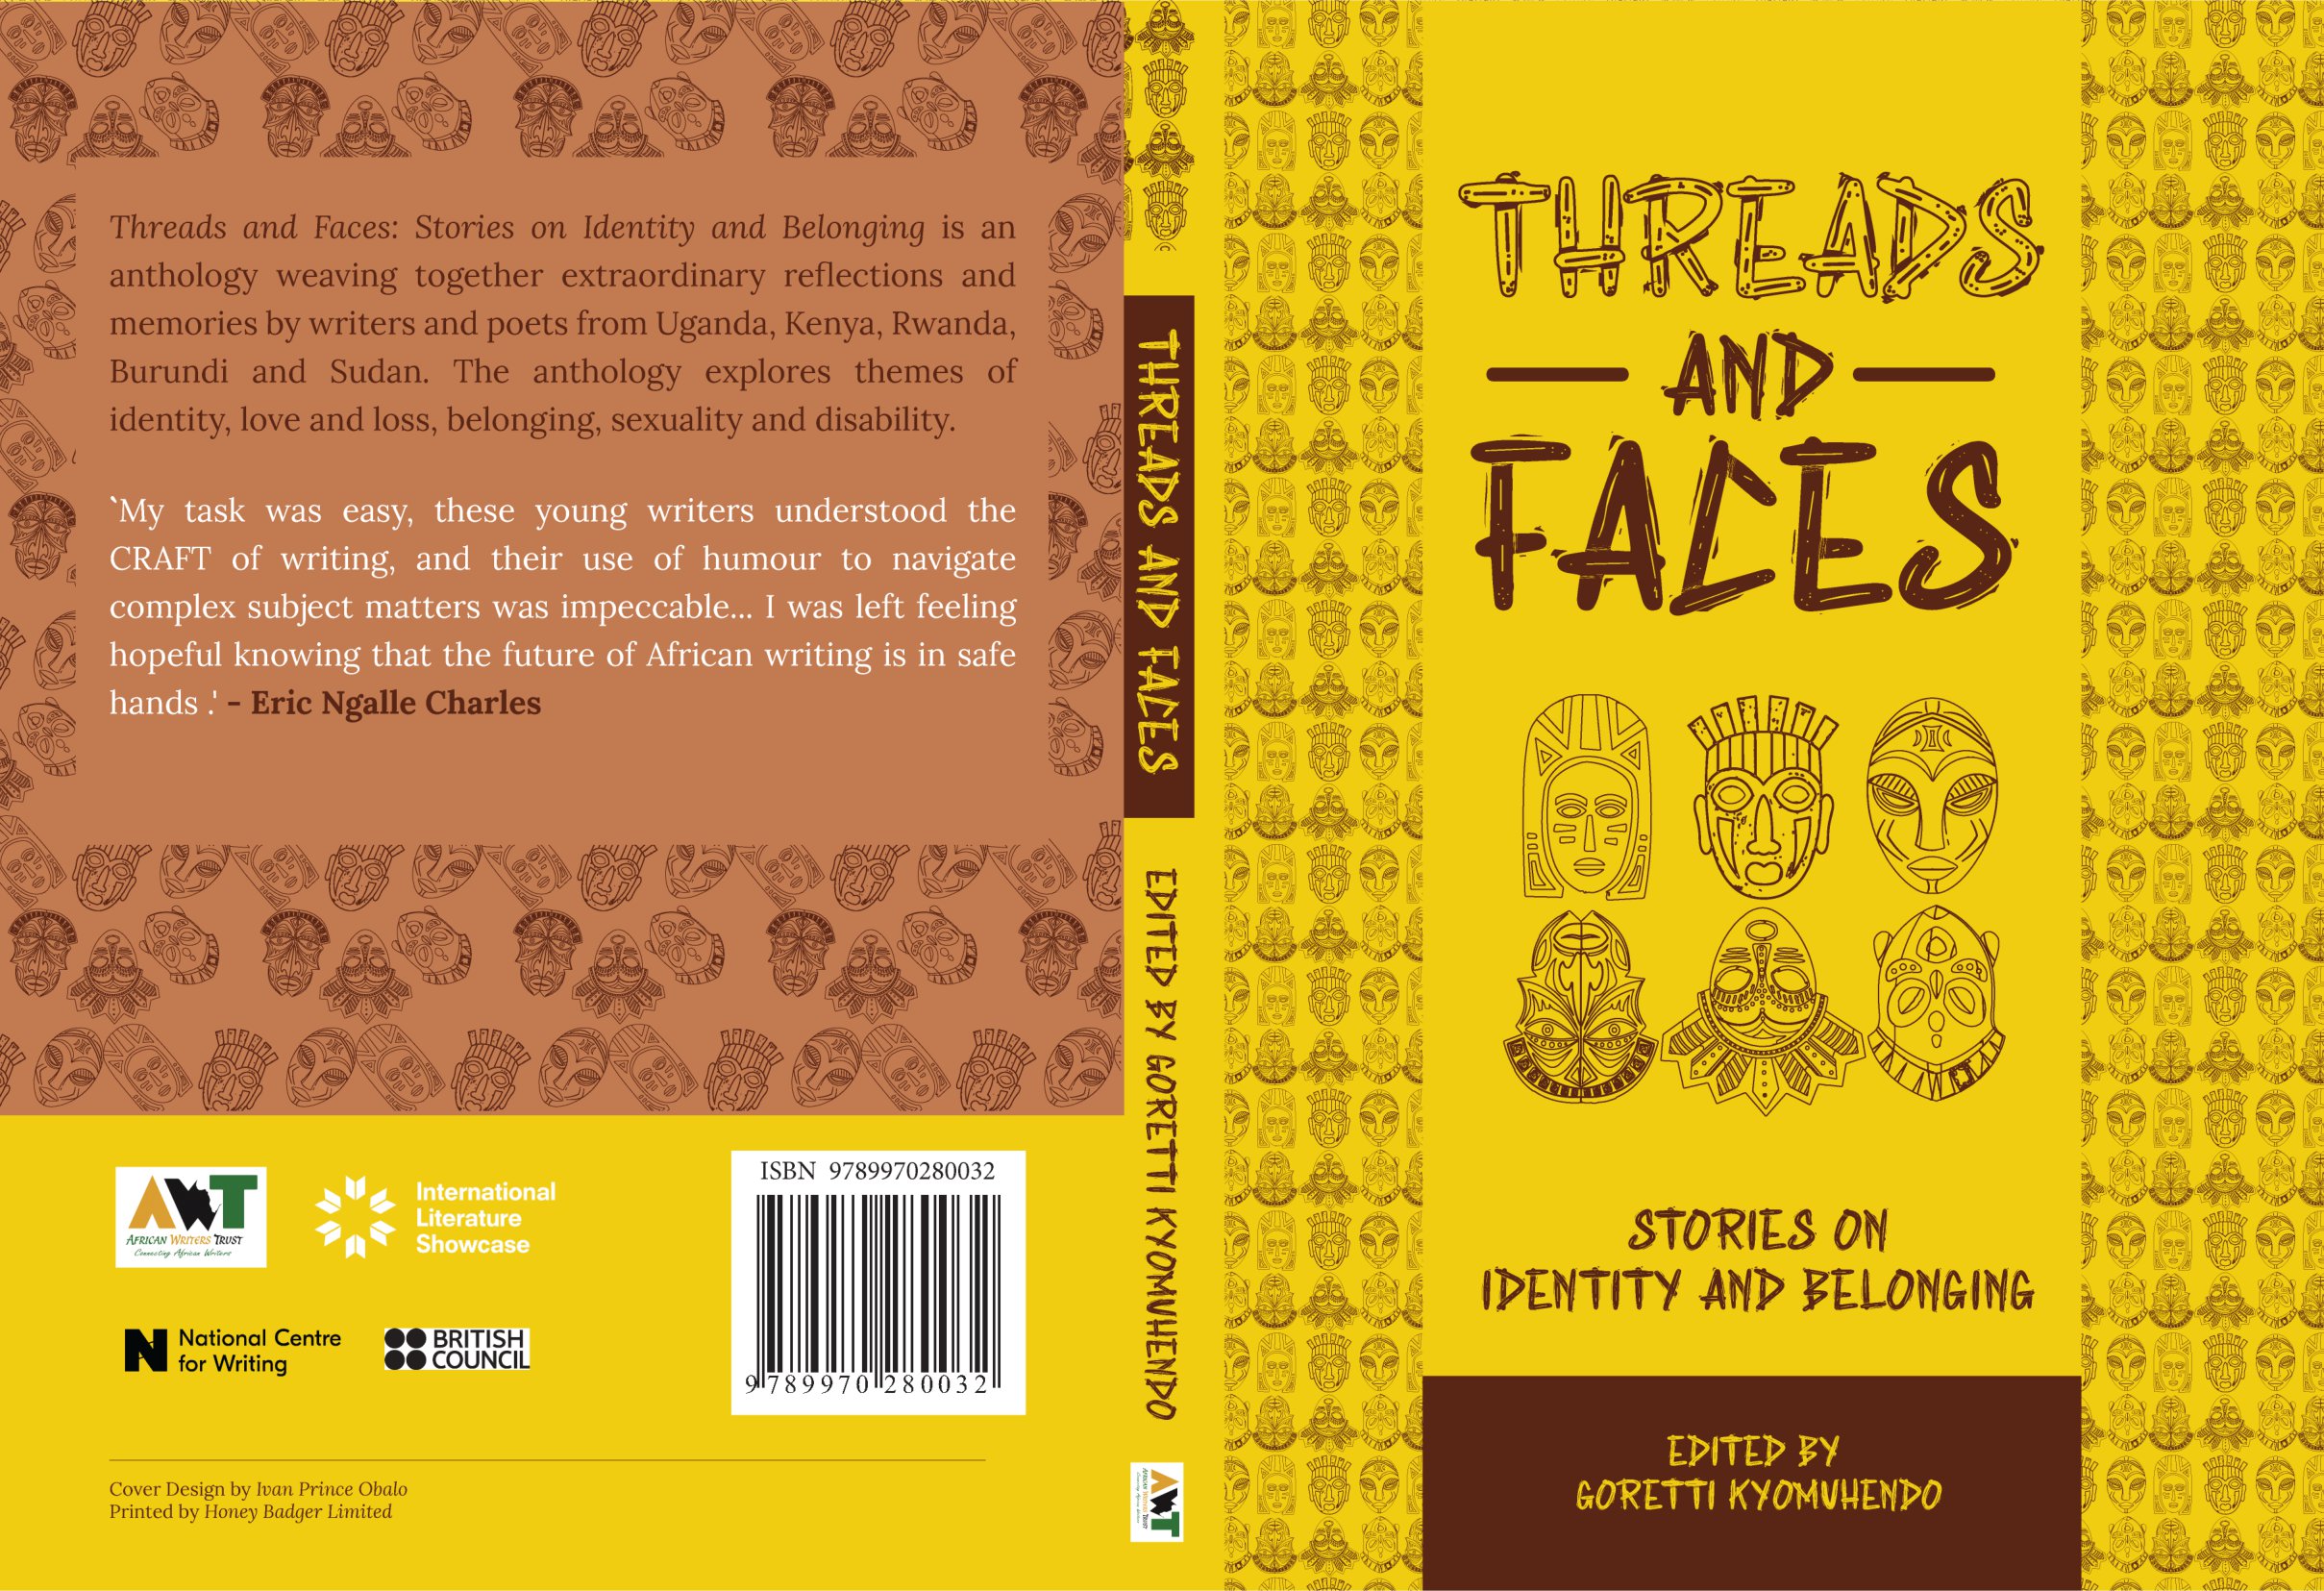 Threads and Faces book cover. Yellow with illustration of African masks. Under the illustration reads: Stories on Identity and Belonging. Edited by Goretti Kyomuhendo